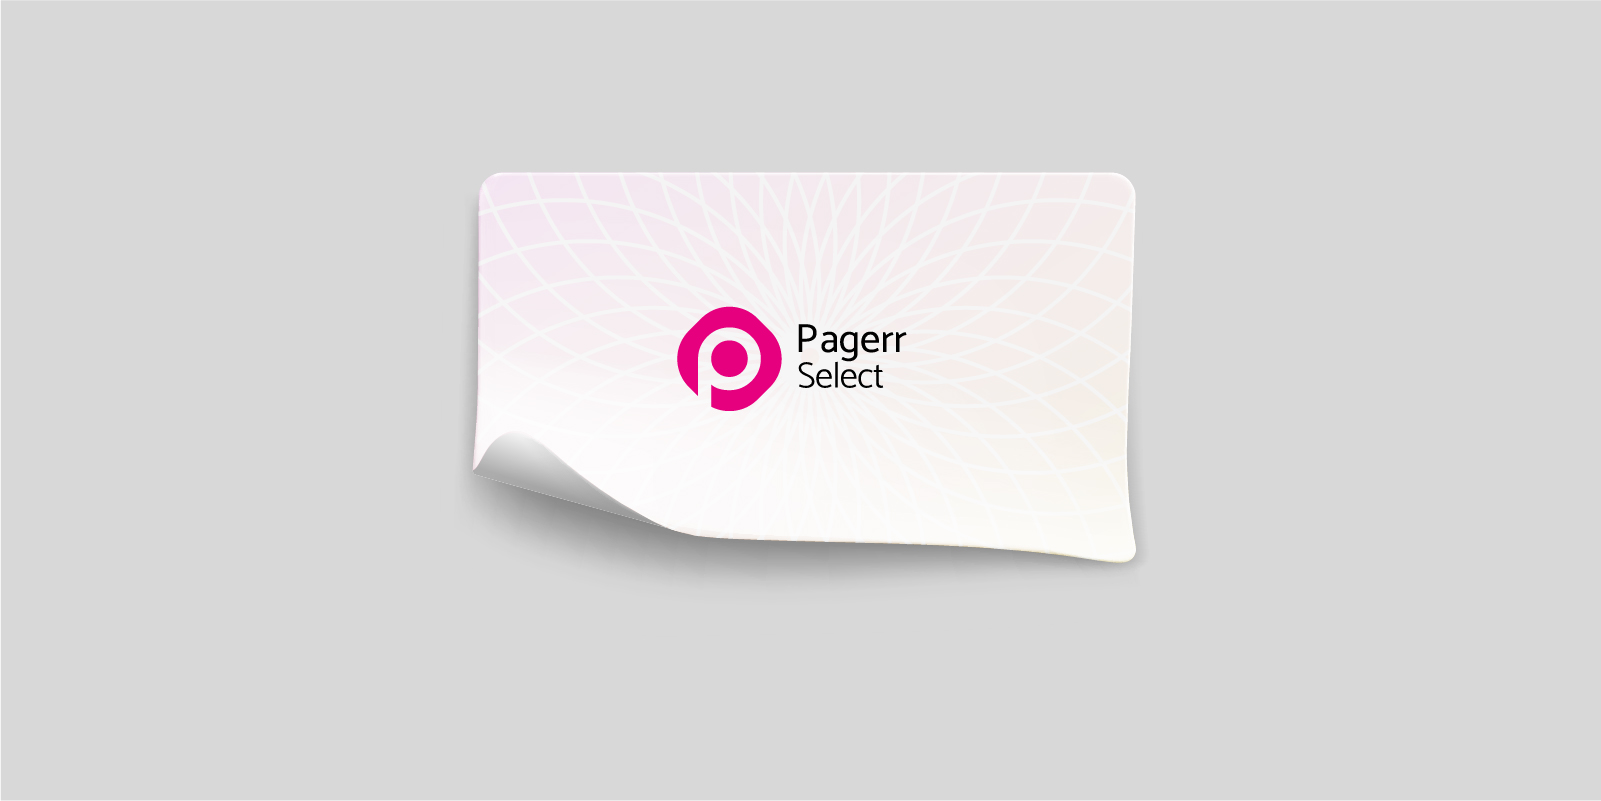 Sheet stickers in Warsaw - Print with Pagerr